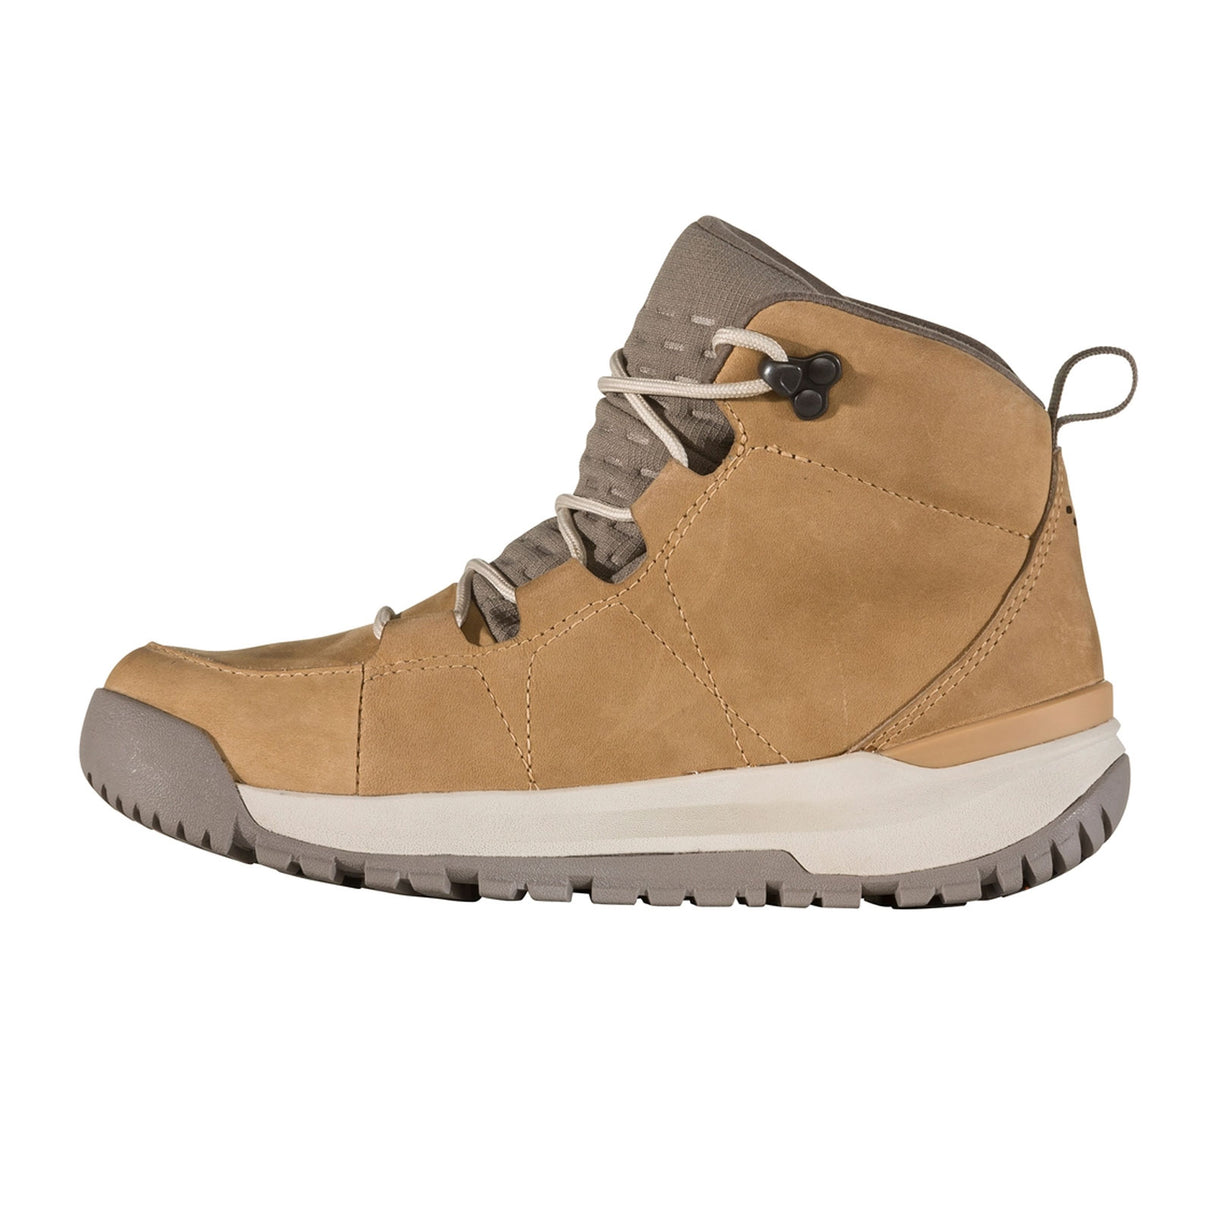 Oboz Sphinx Mid Insulated B-DRY Winter Boot (Women) - Iced Coffee Boots - Winter - Low - The Heel Shoe Fitters